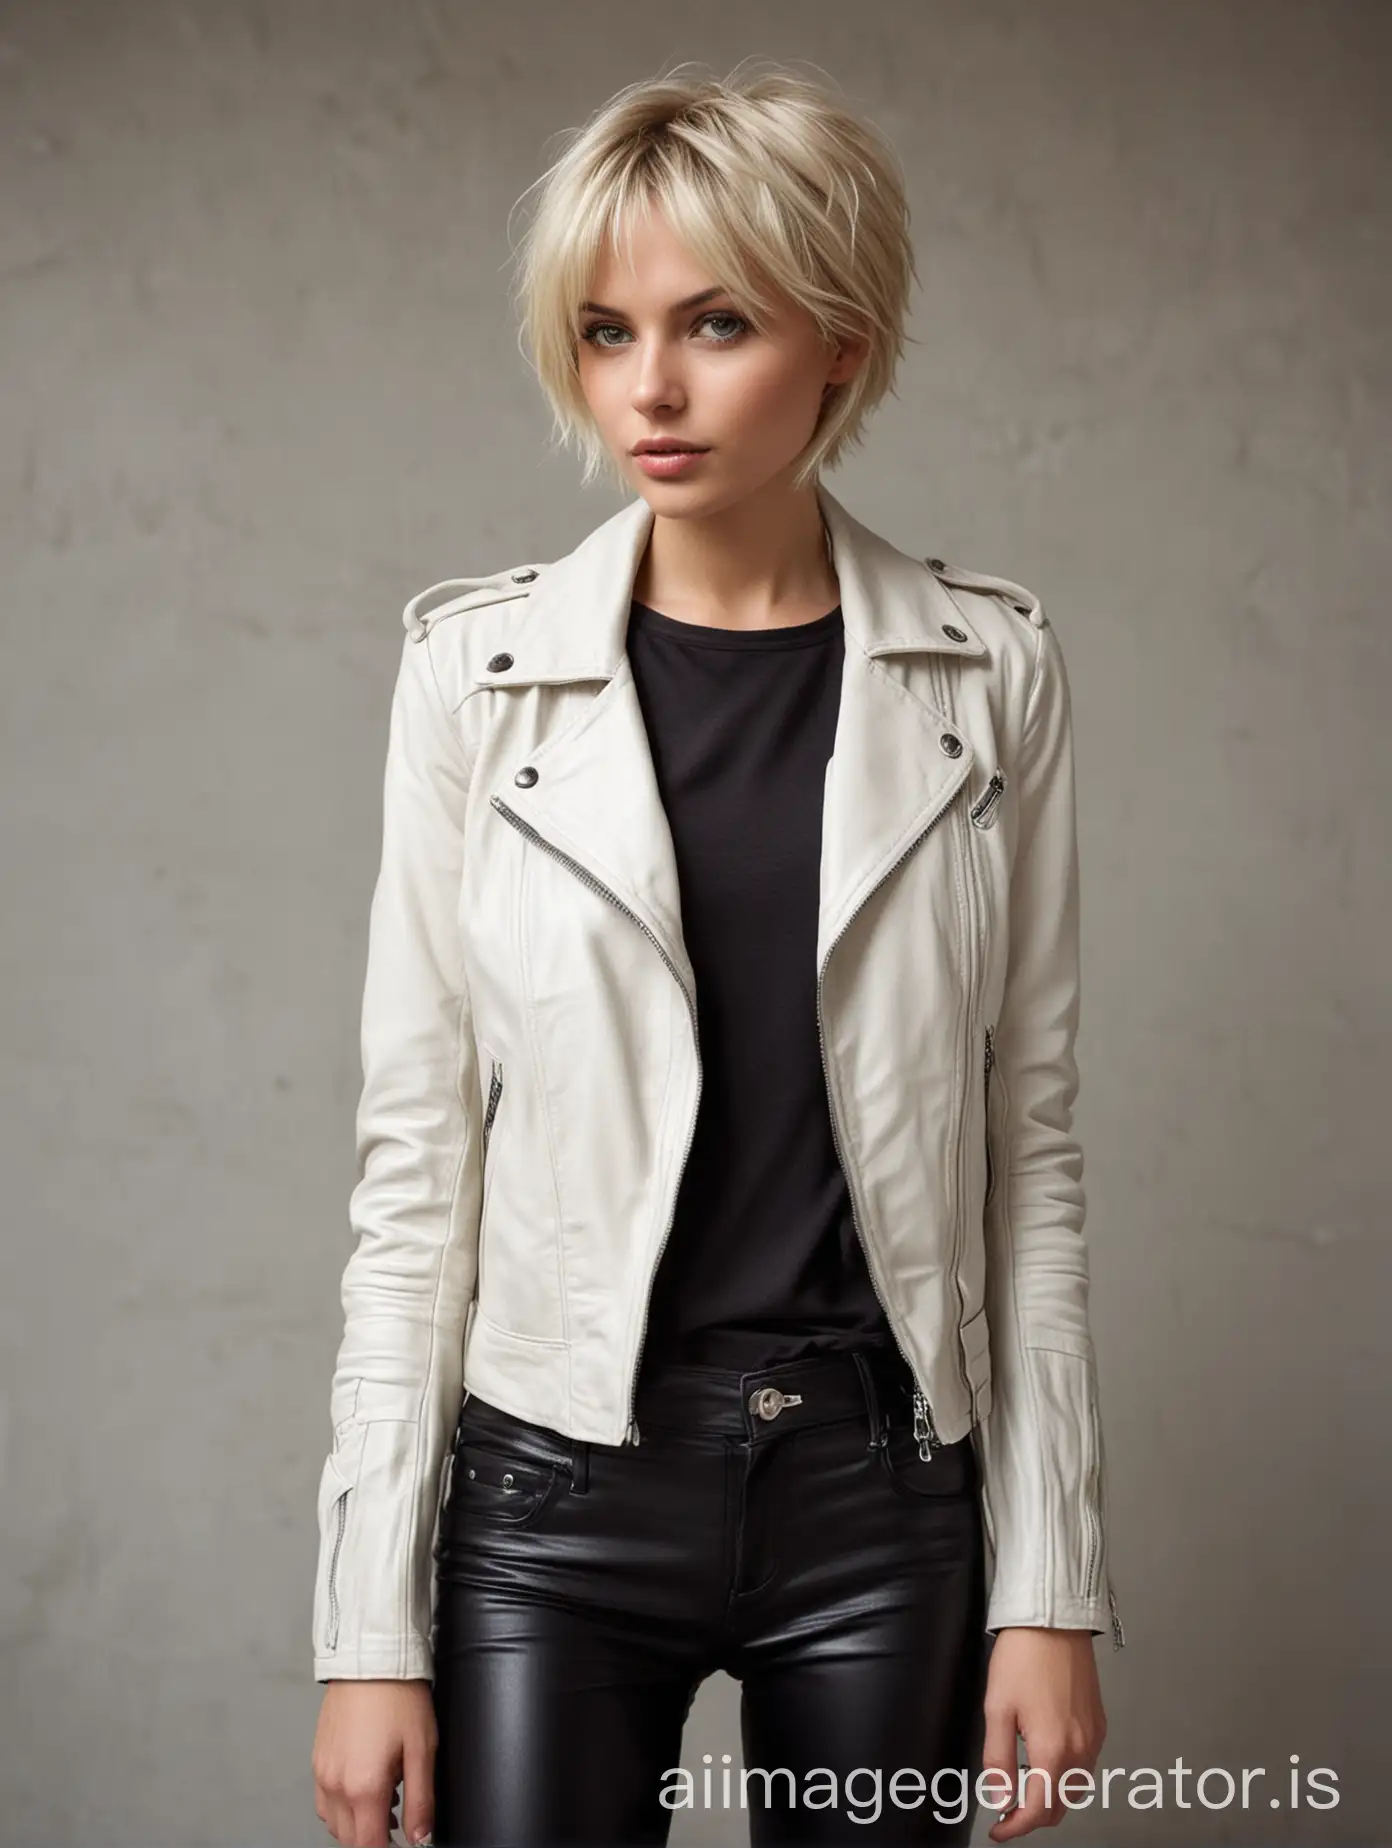 Beautiful-Blonde-Woman-in-Leather-Pants-and-Biker-Jacket